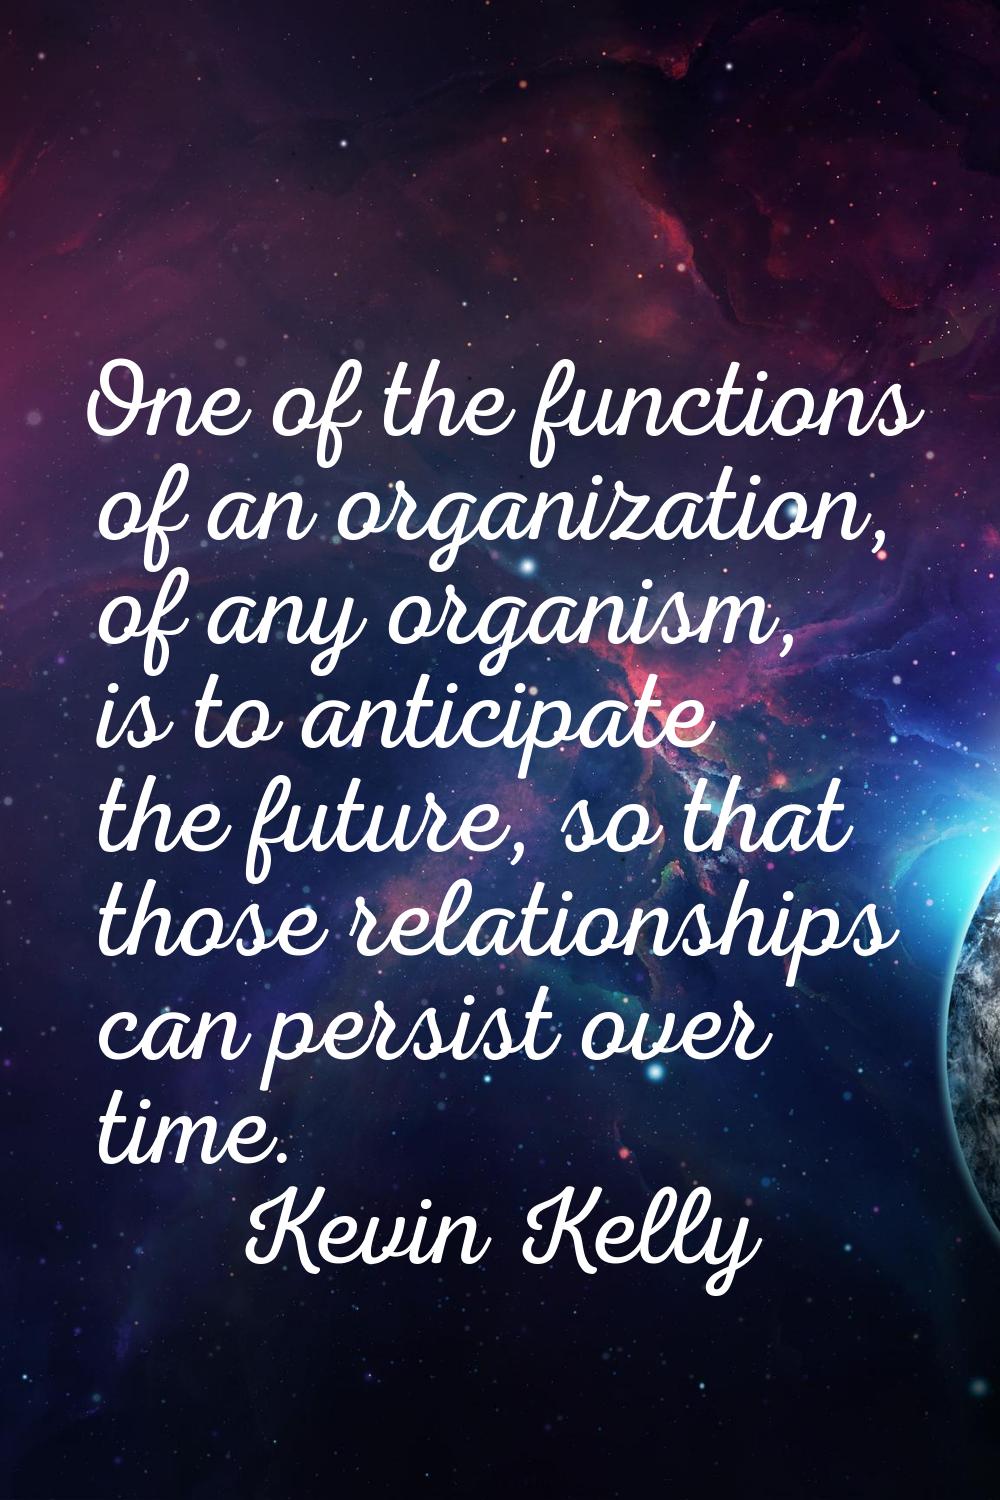 One of the functions of an organization, of any organism, is to anticipate the future, so that thos